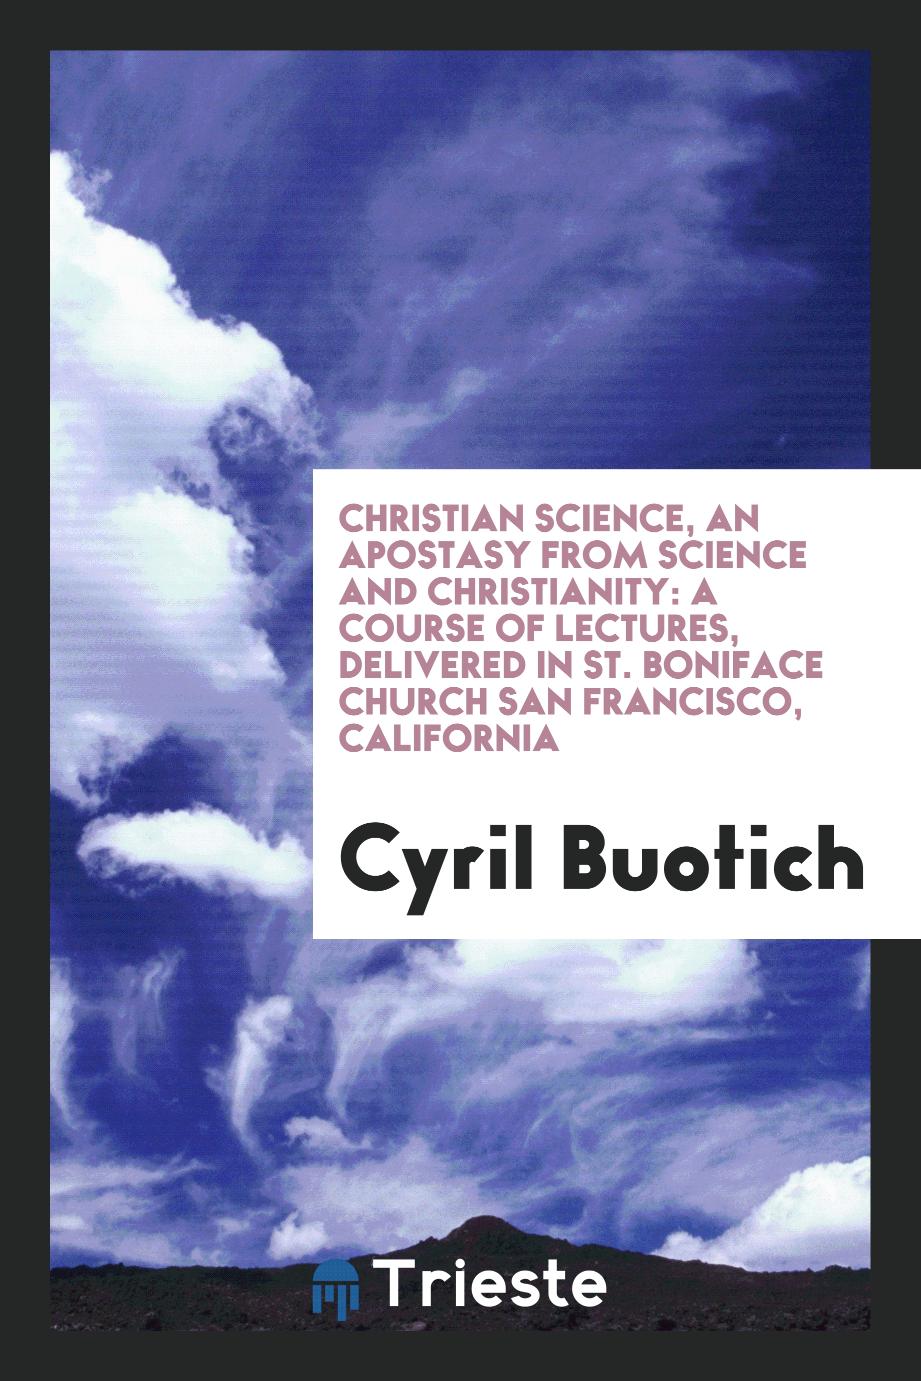 Christian Science, an Apostasy from Science and Christianity: A Course of Lectures, Delivered in St. Boniface Church San Francisco, California